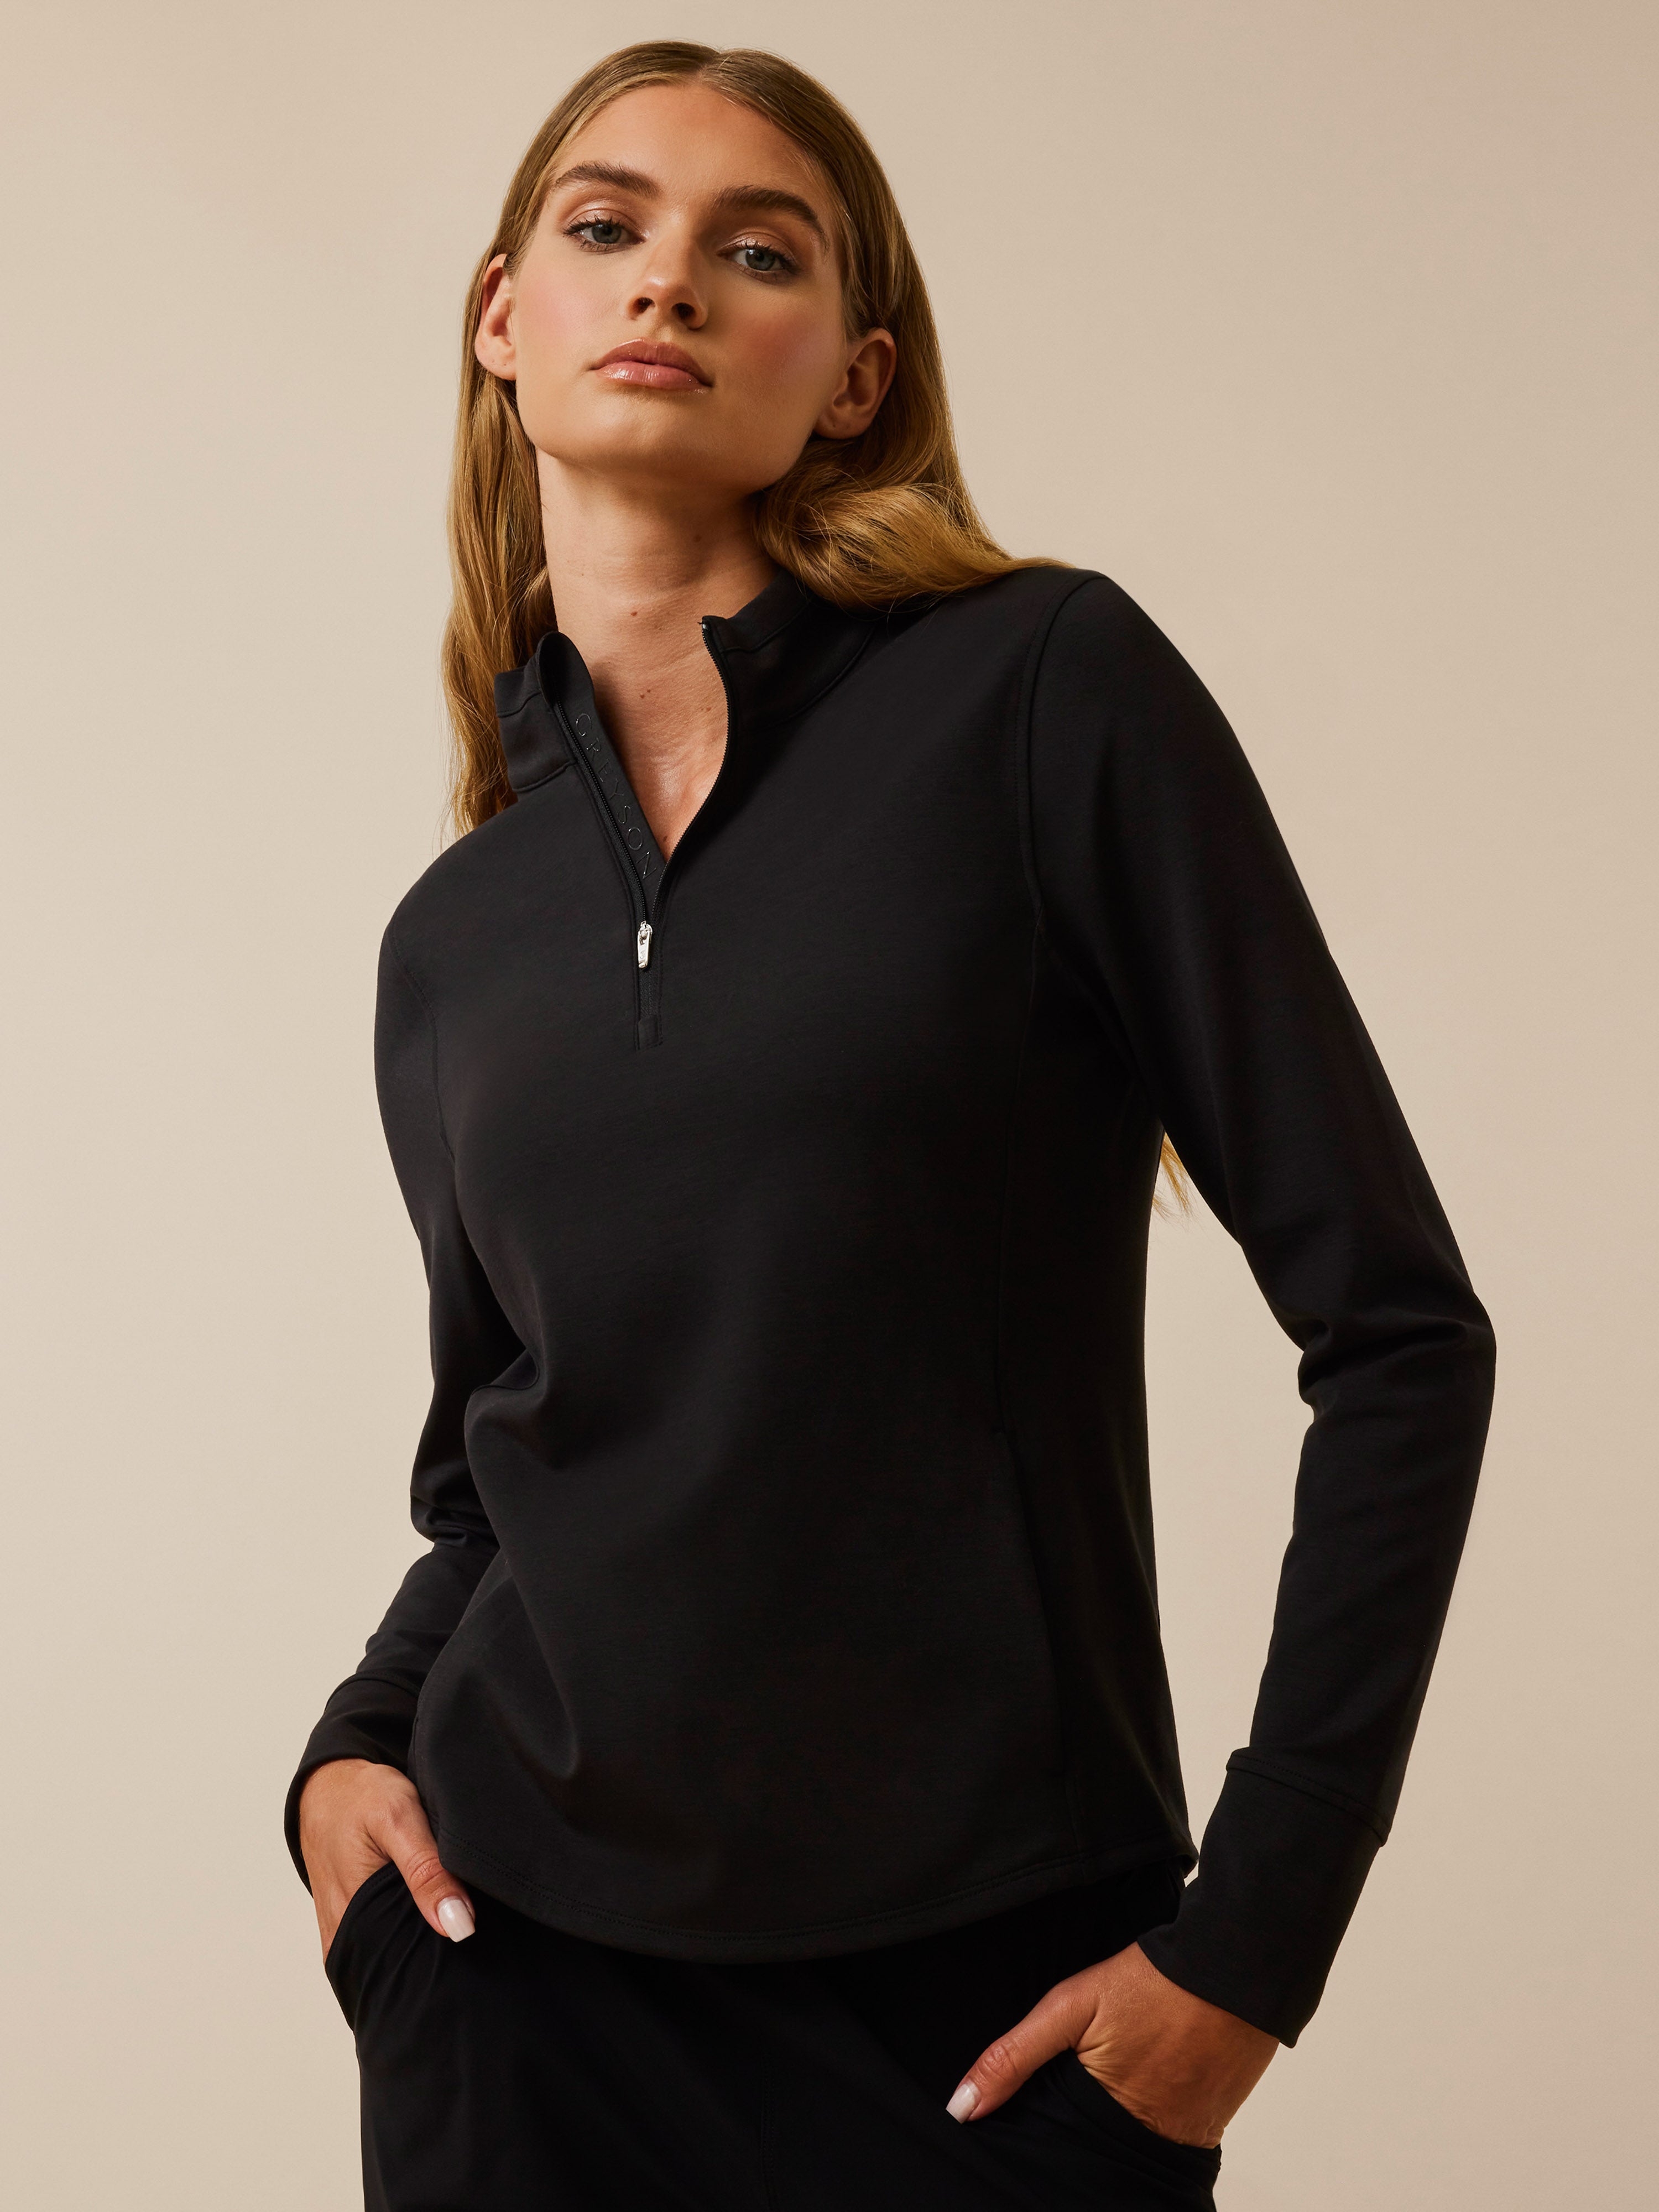 Up to 60% Off Women's Sale – Greyson Clothiers